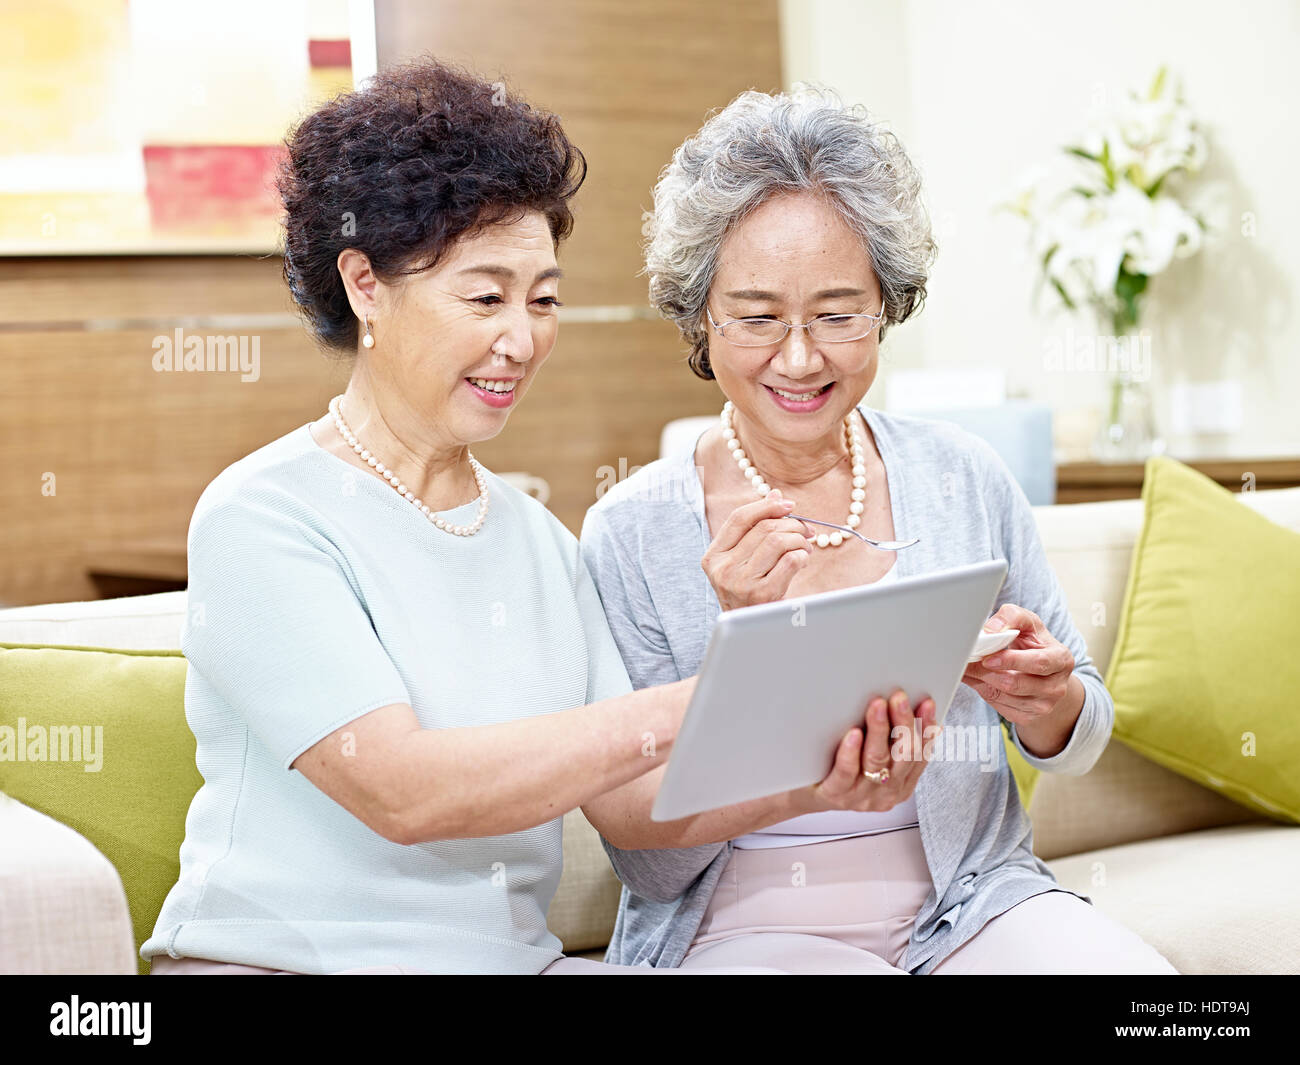 two senior asian women sitting on couch using tablet computer, happy and smiling Stock Photo